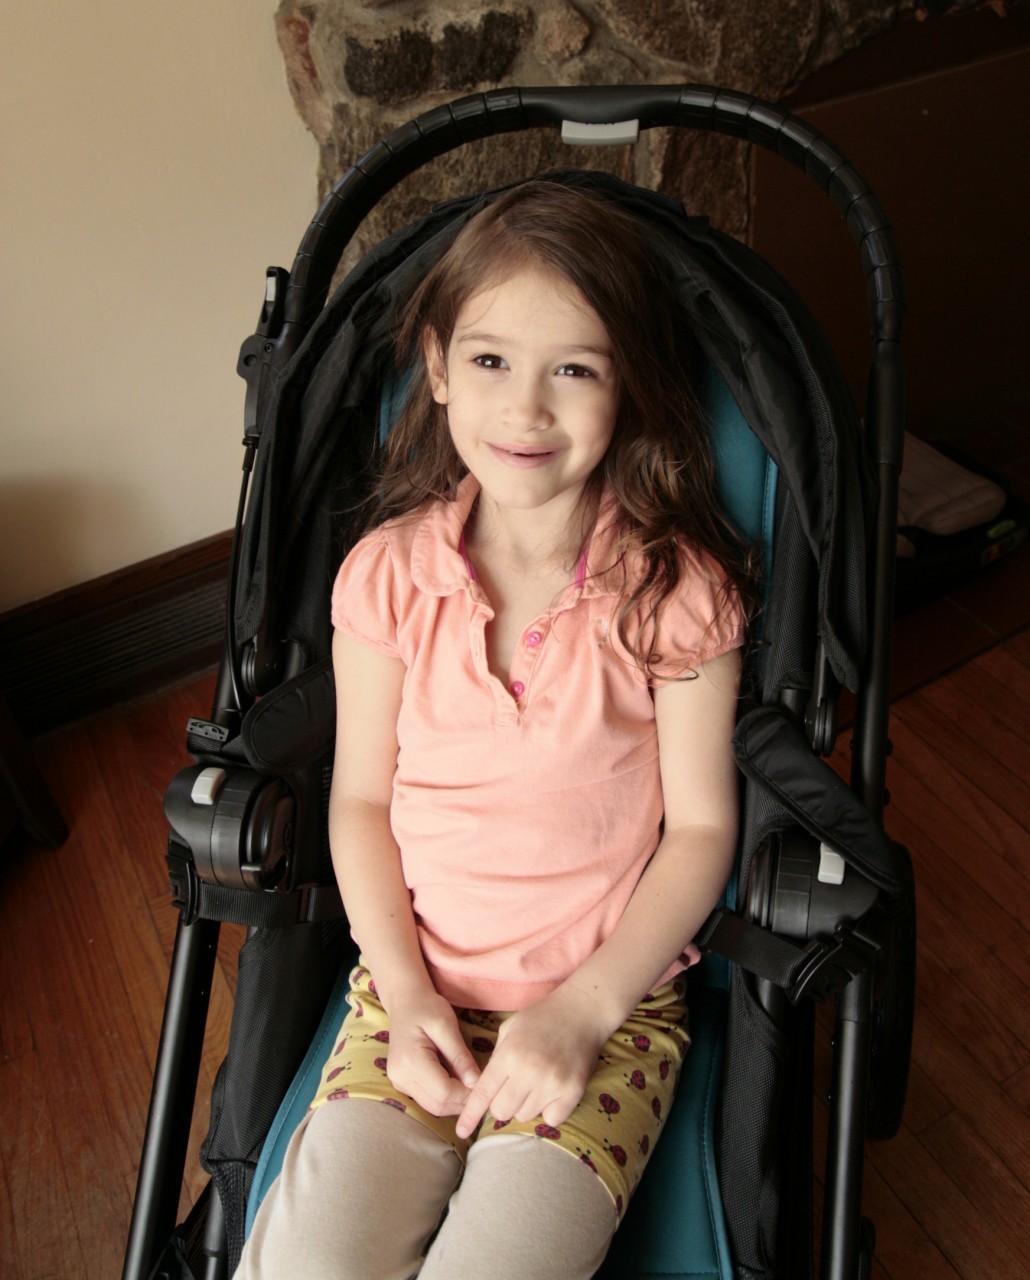 stroller for 5 years old